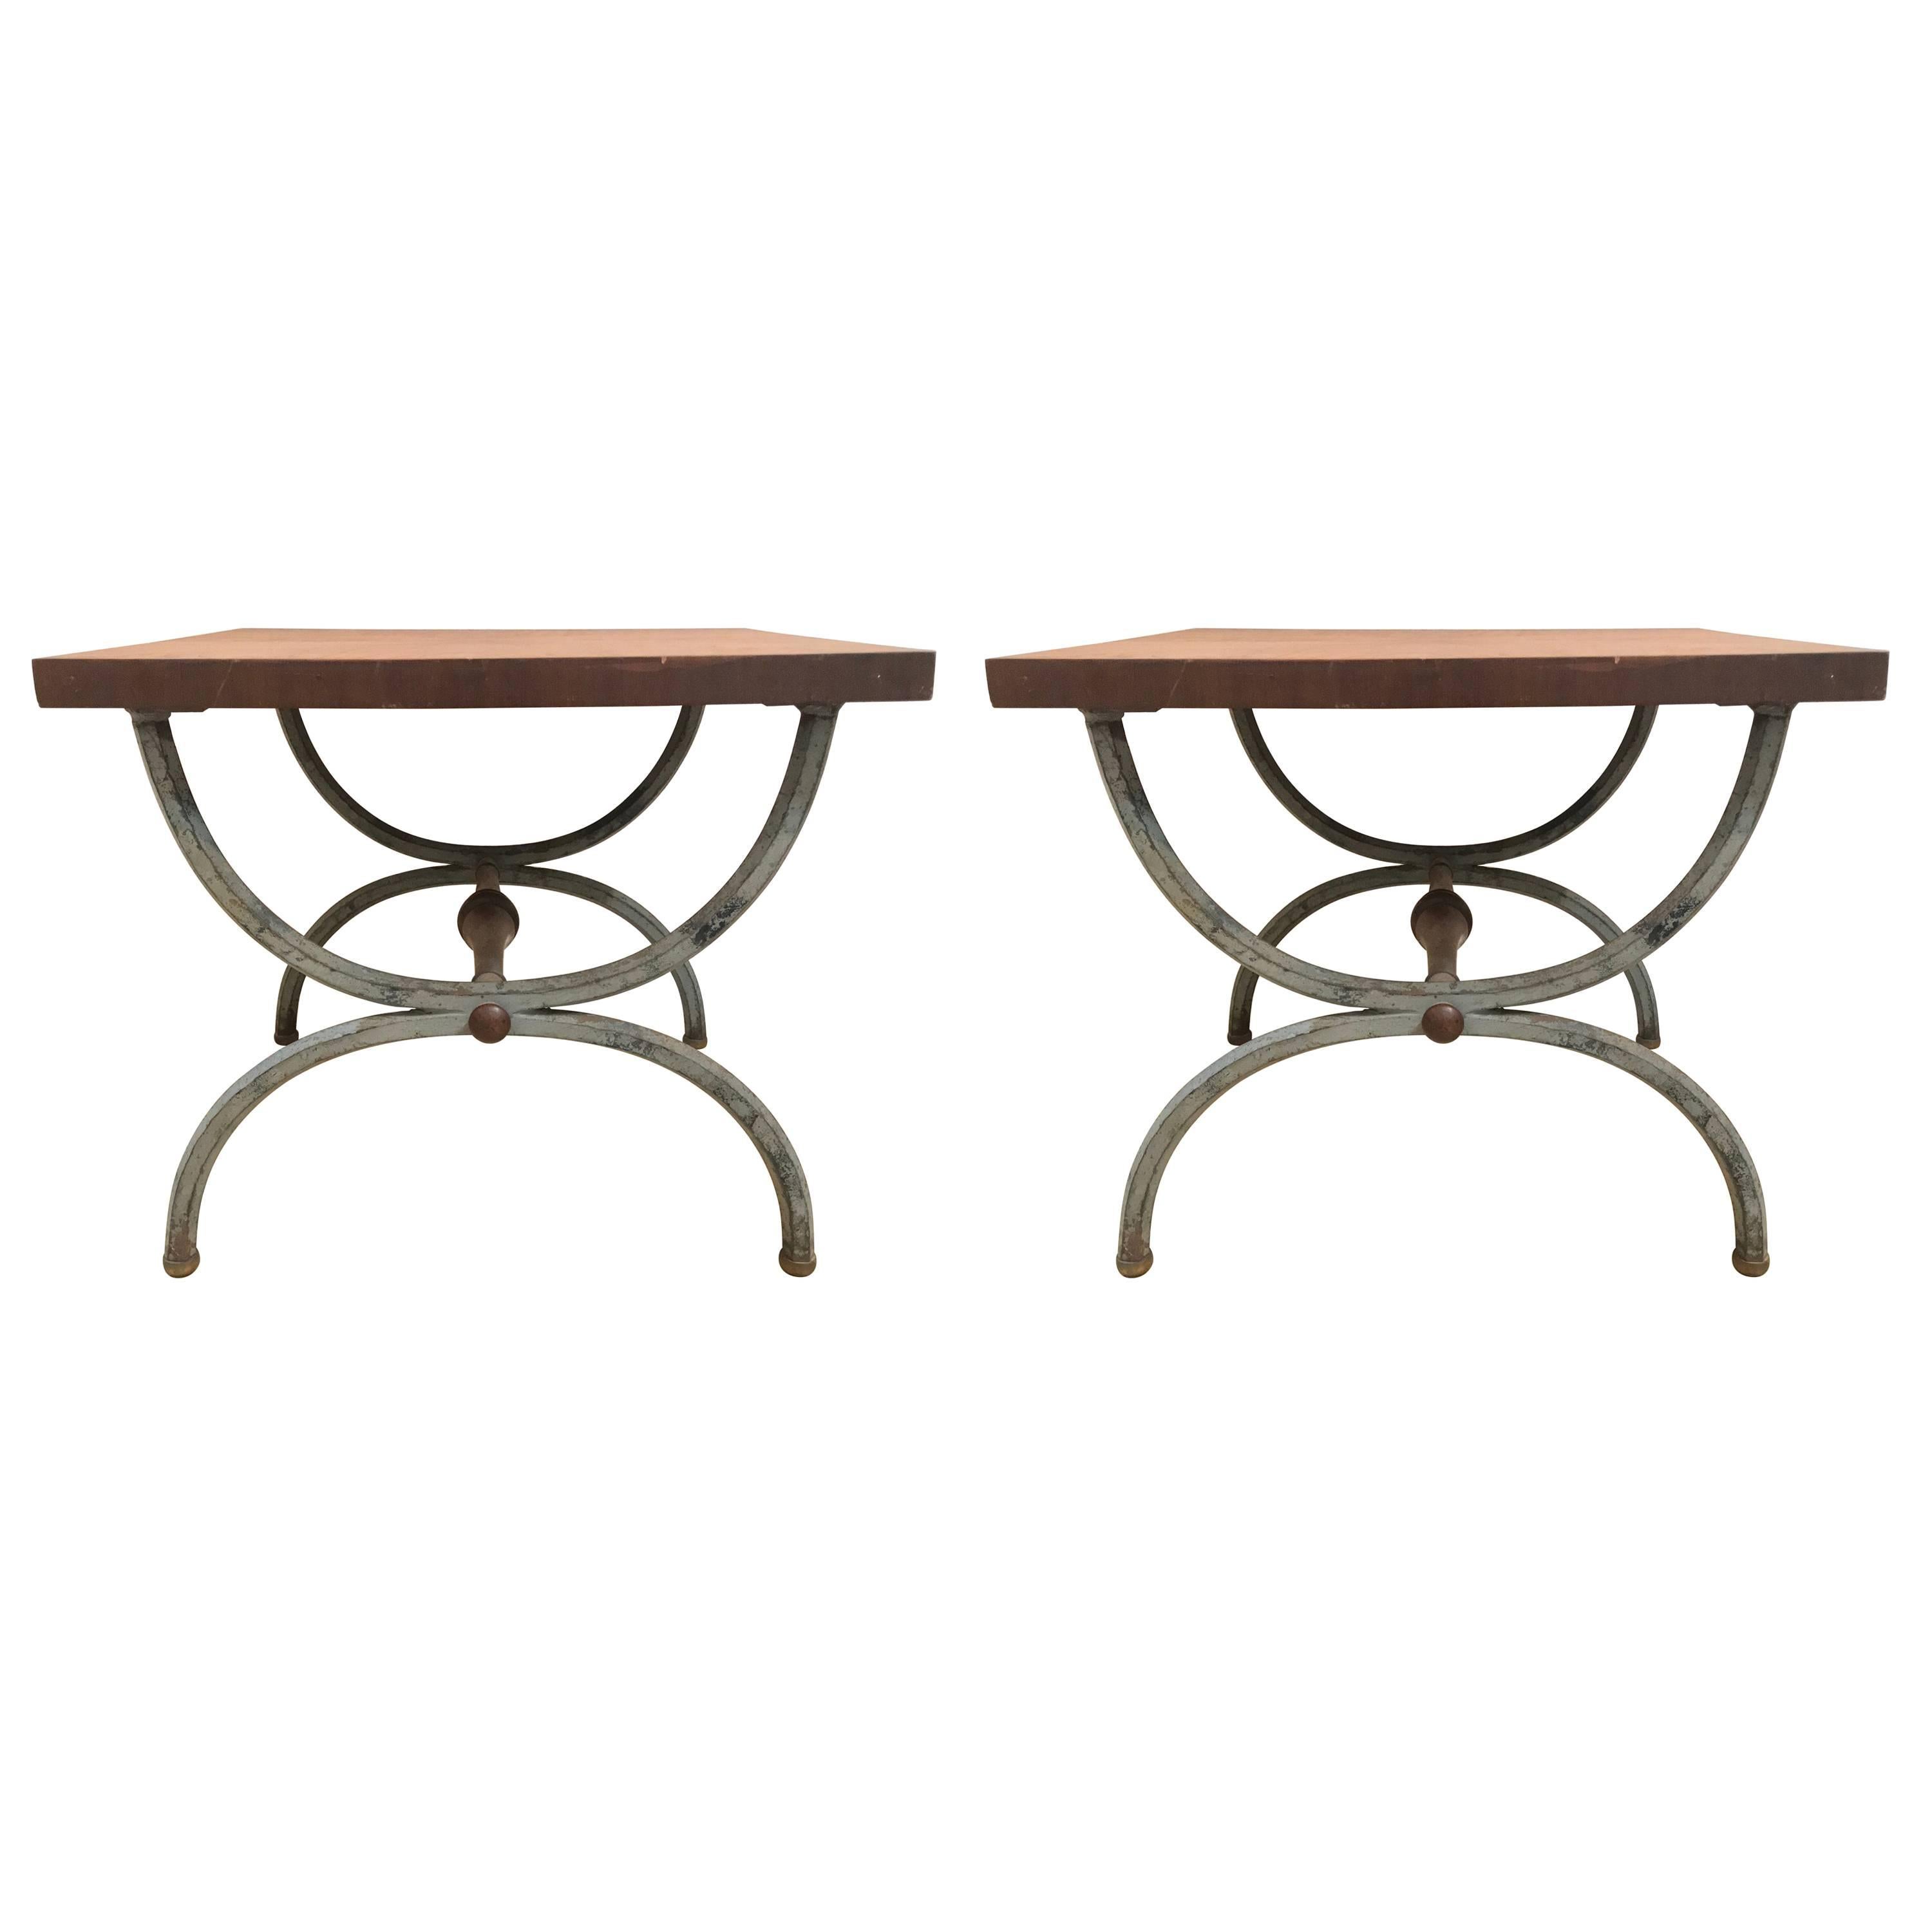 Pair of Grey Finish Tomlinson Pavane Forged Iron Parquetry Side Tables